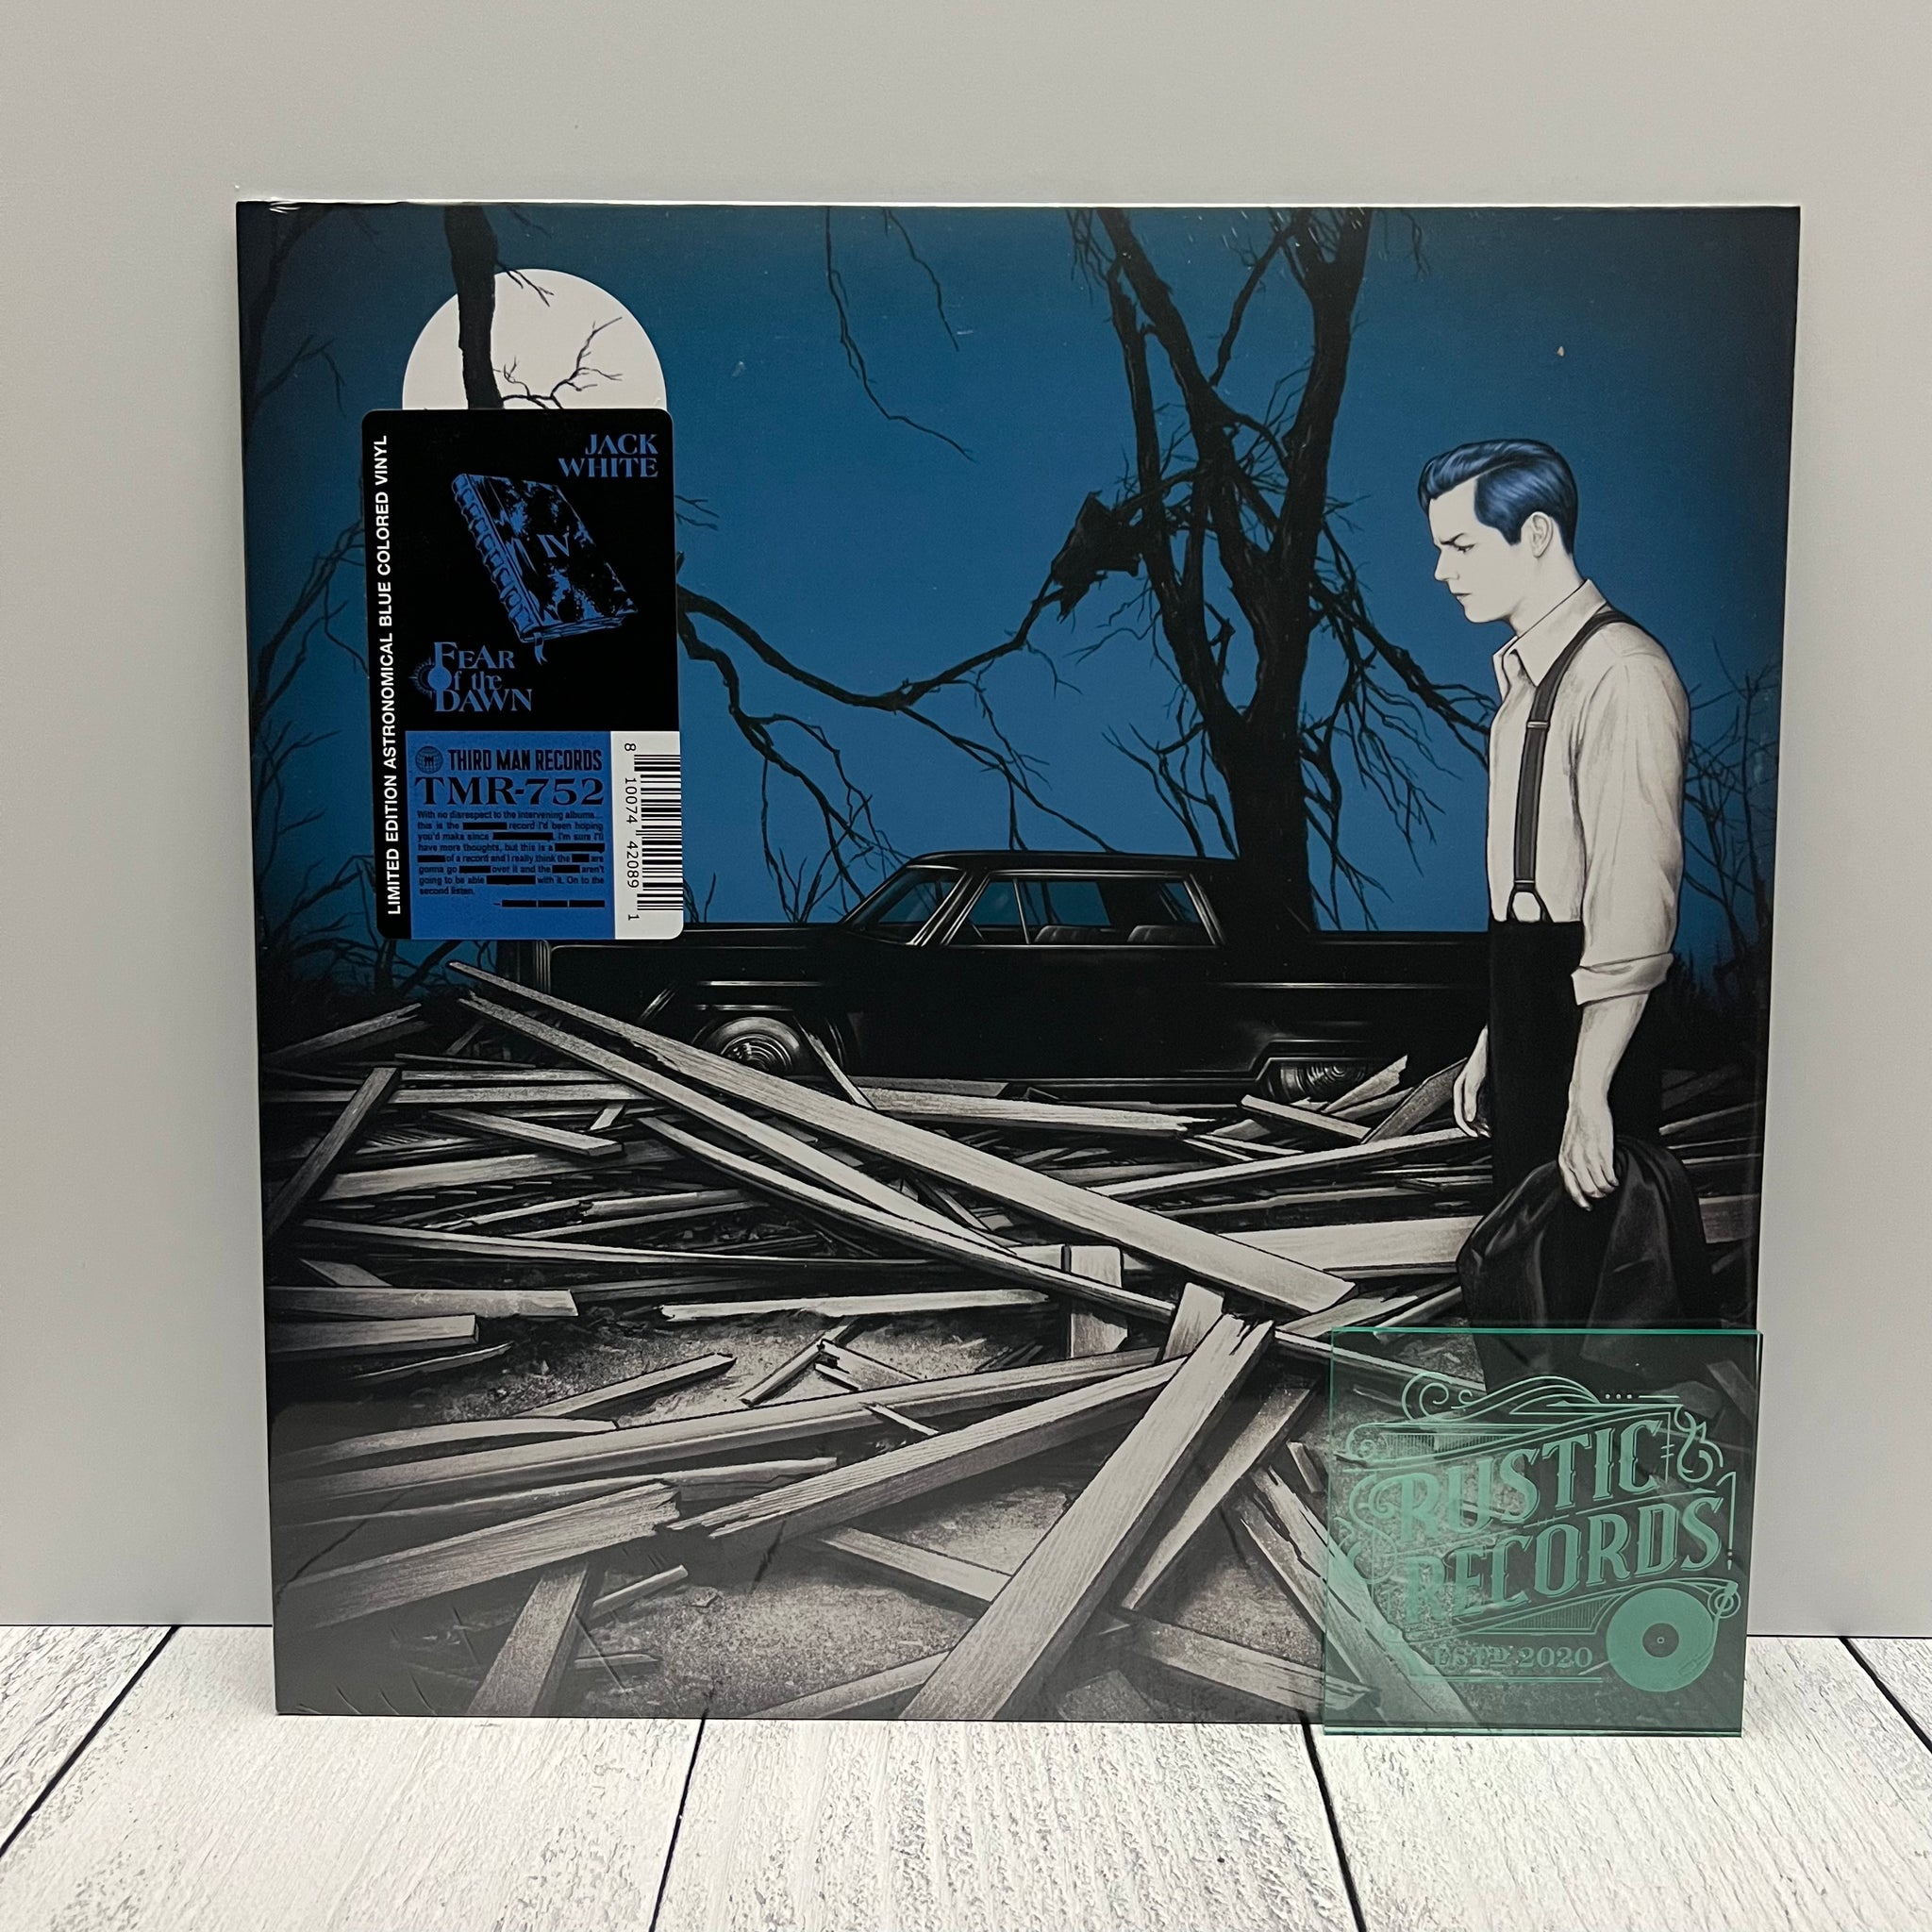 Jack White - Fear Of The Dawn (Indie Excl. Astronomical Blue Vinyl)